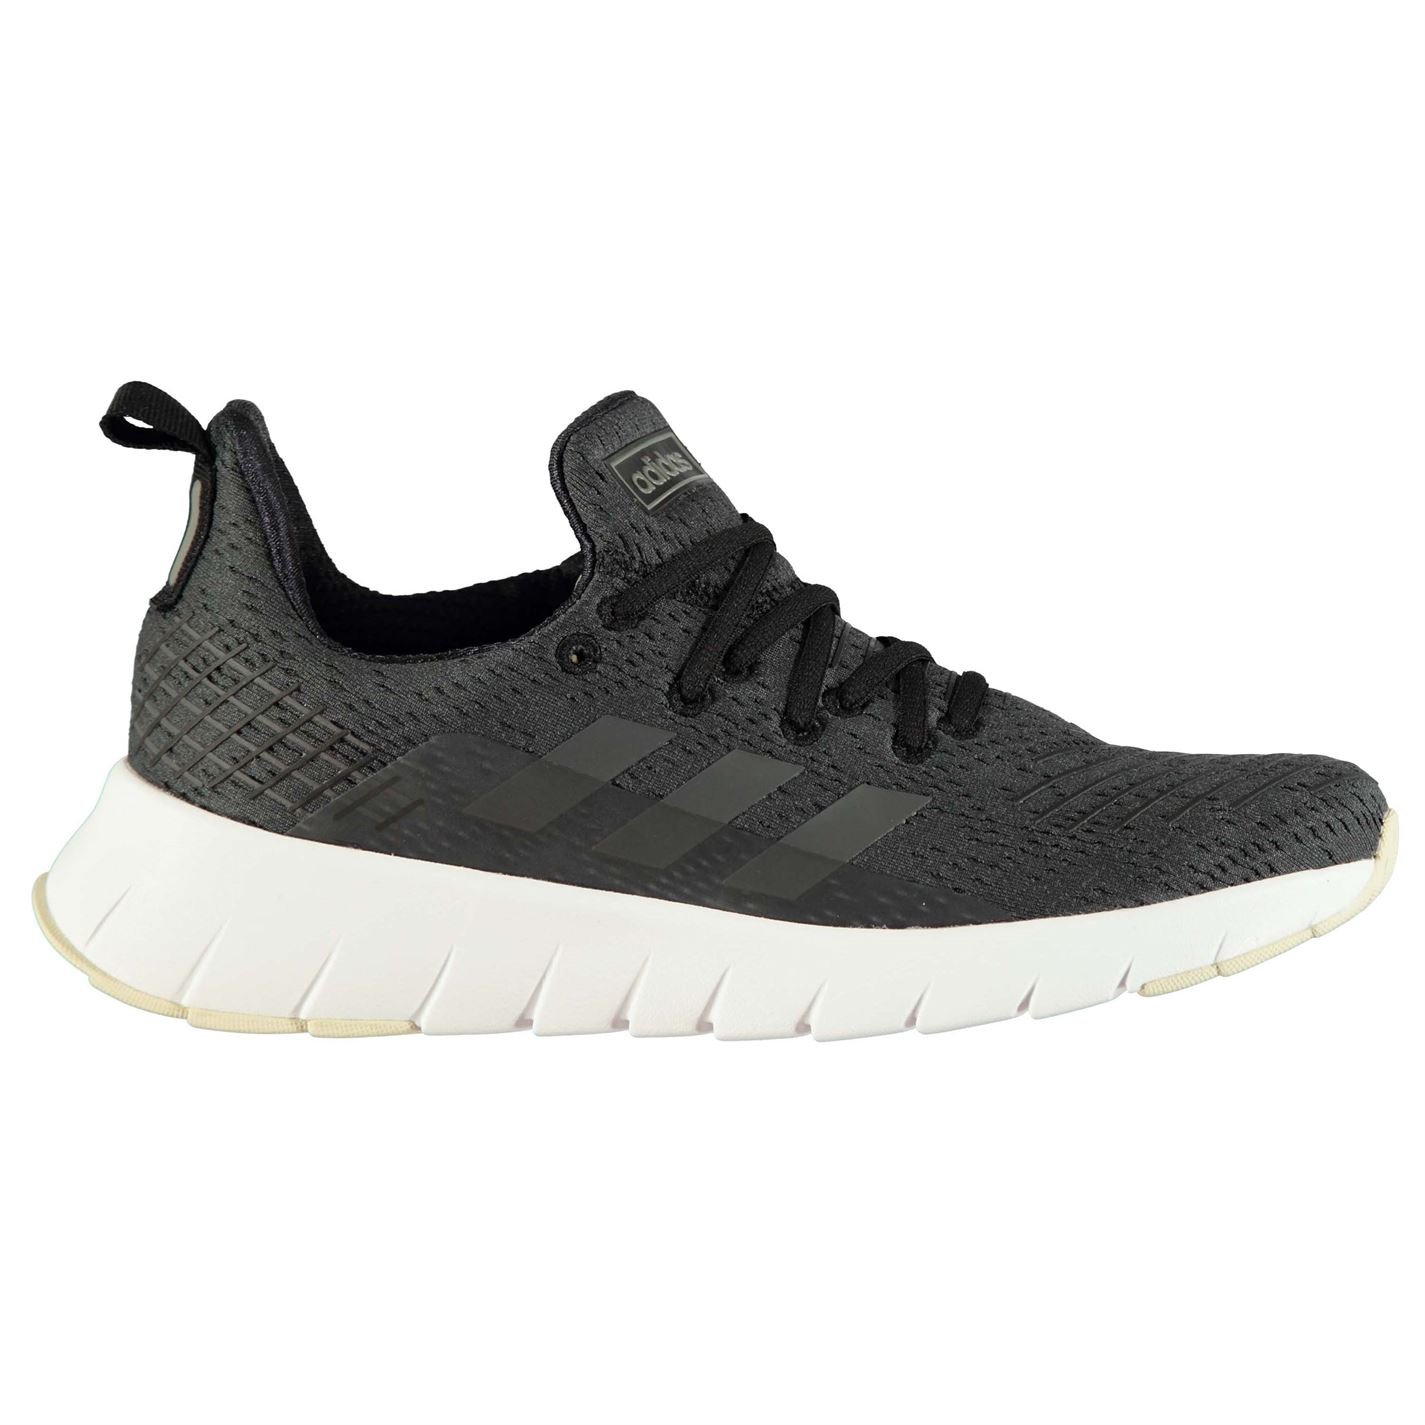 Adidas Asweego Mens Running Shoes